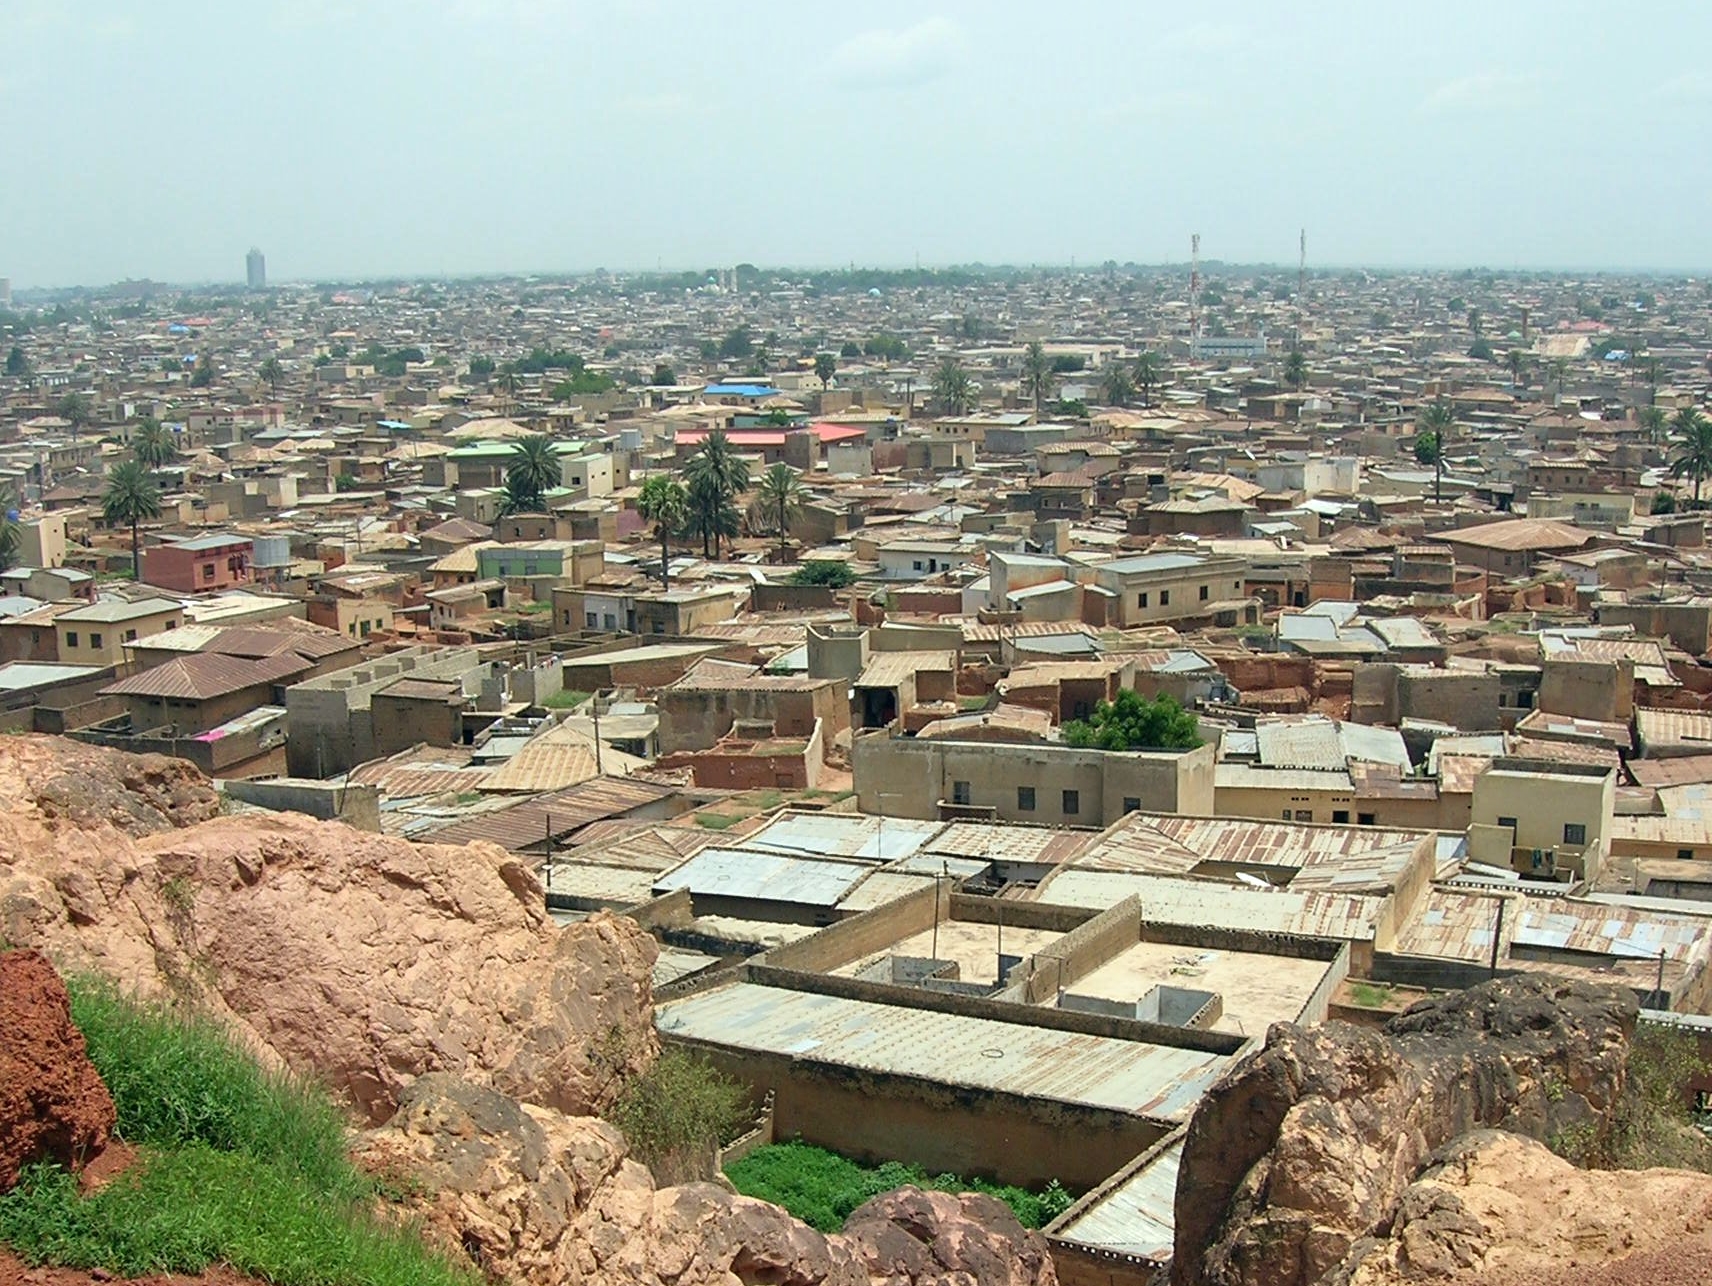 Kano is Nigeria’s second city after Lagos. It has a population of around 4 million people (Shiraz Chakera/CC BY 2.0)